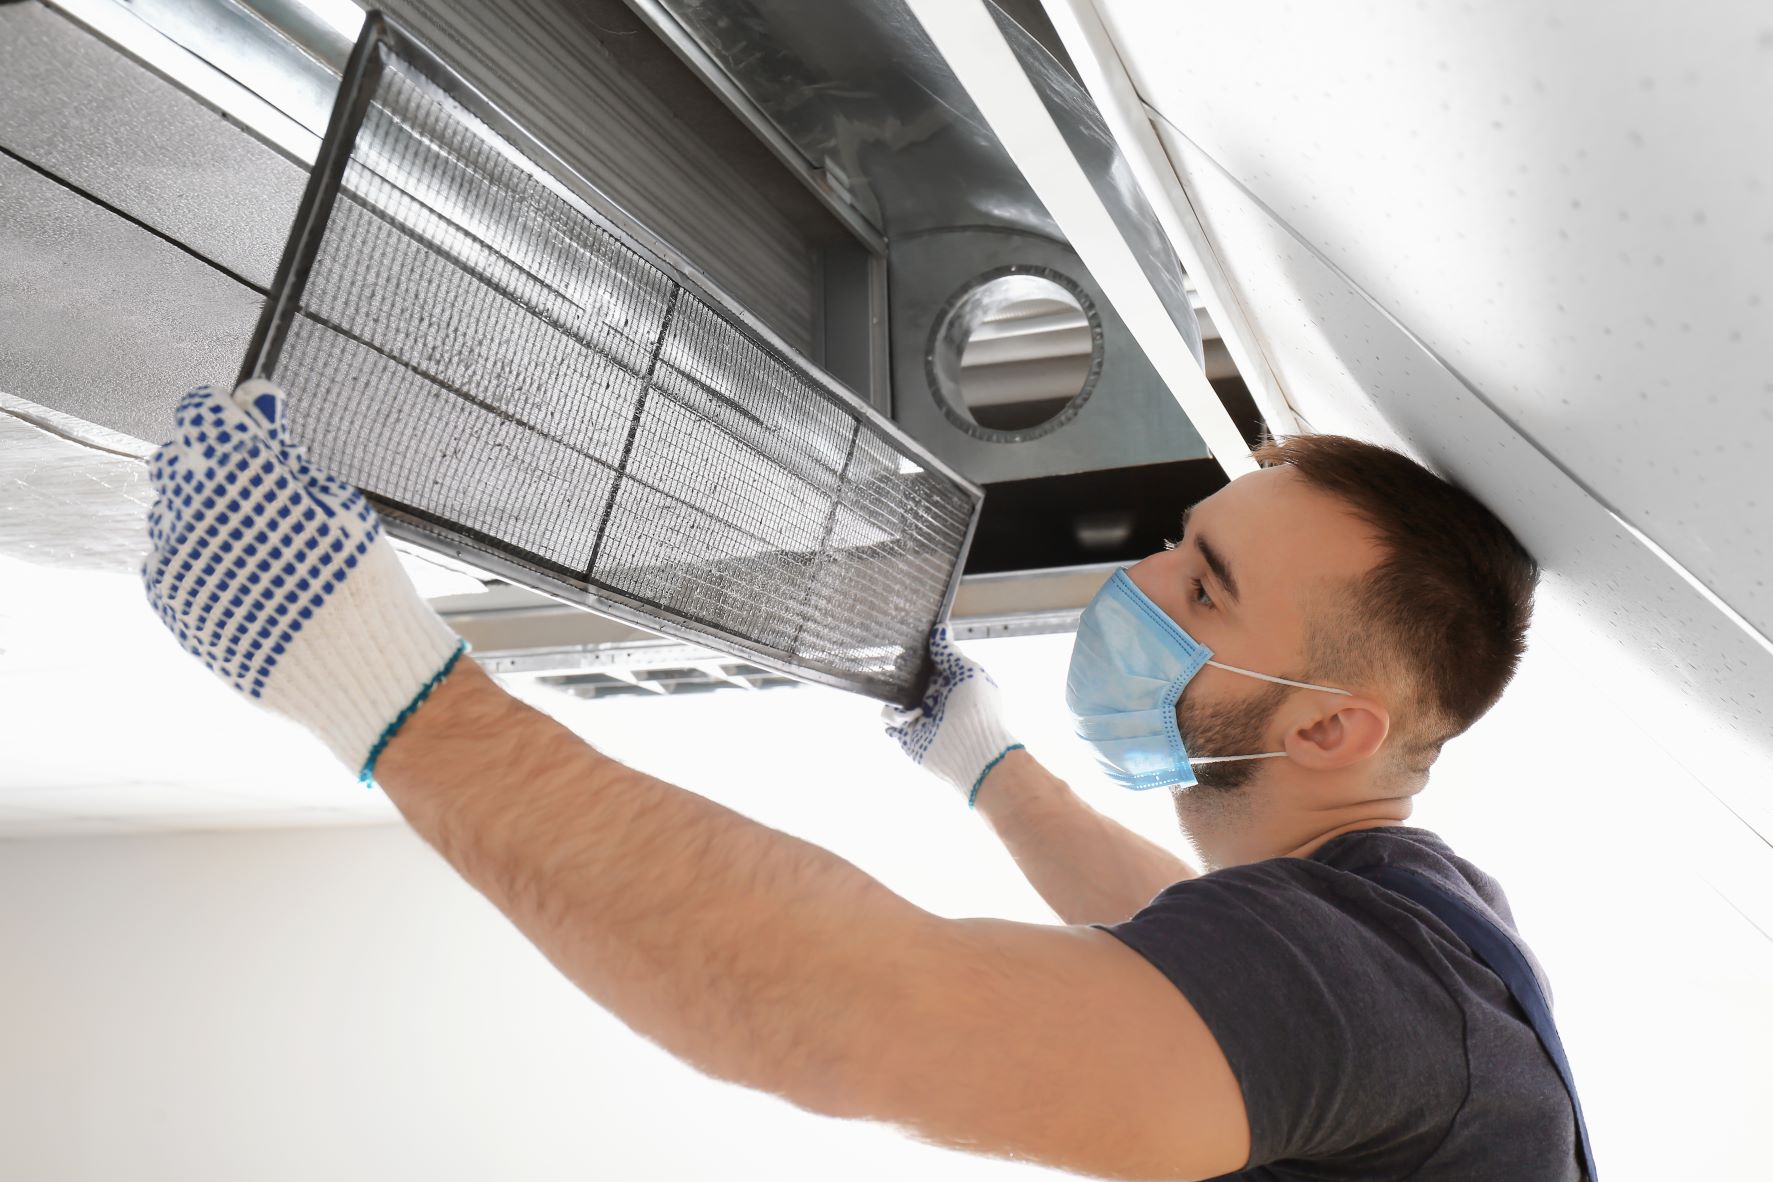 What To Do Before Your Next Air Duct Cleaning Appointment